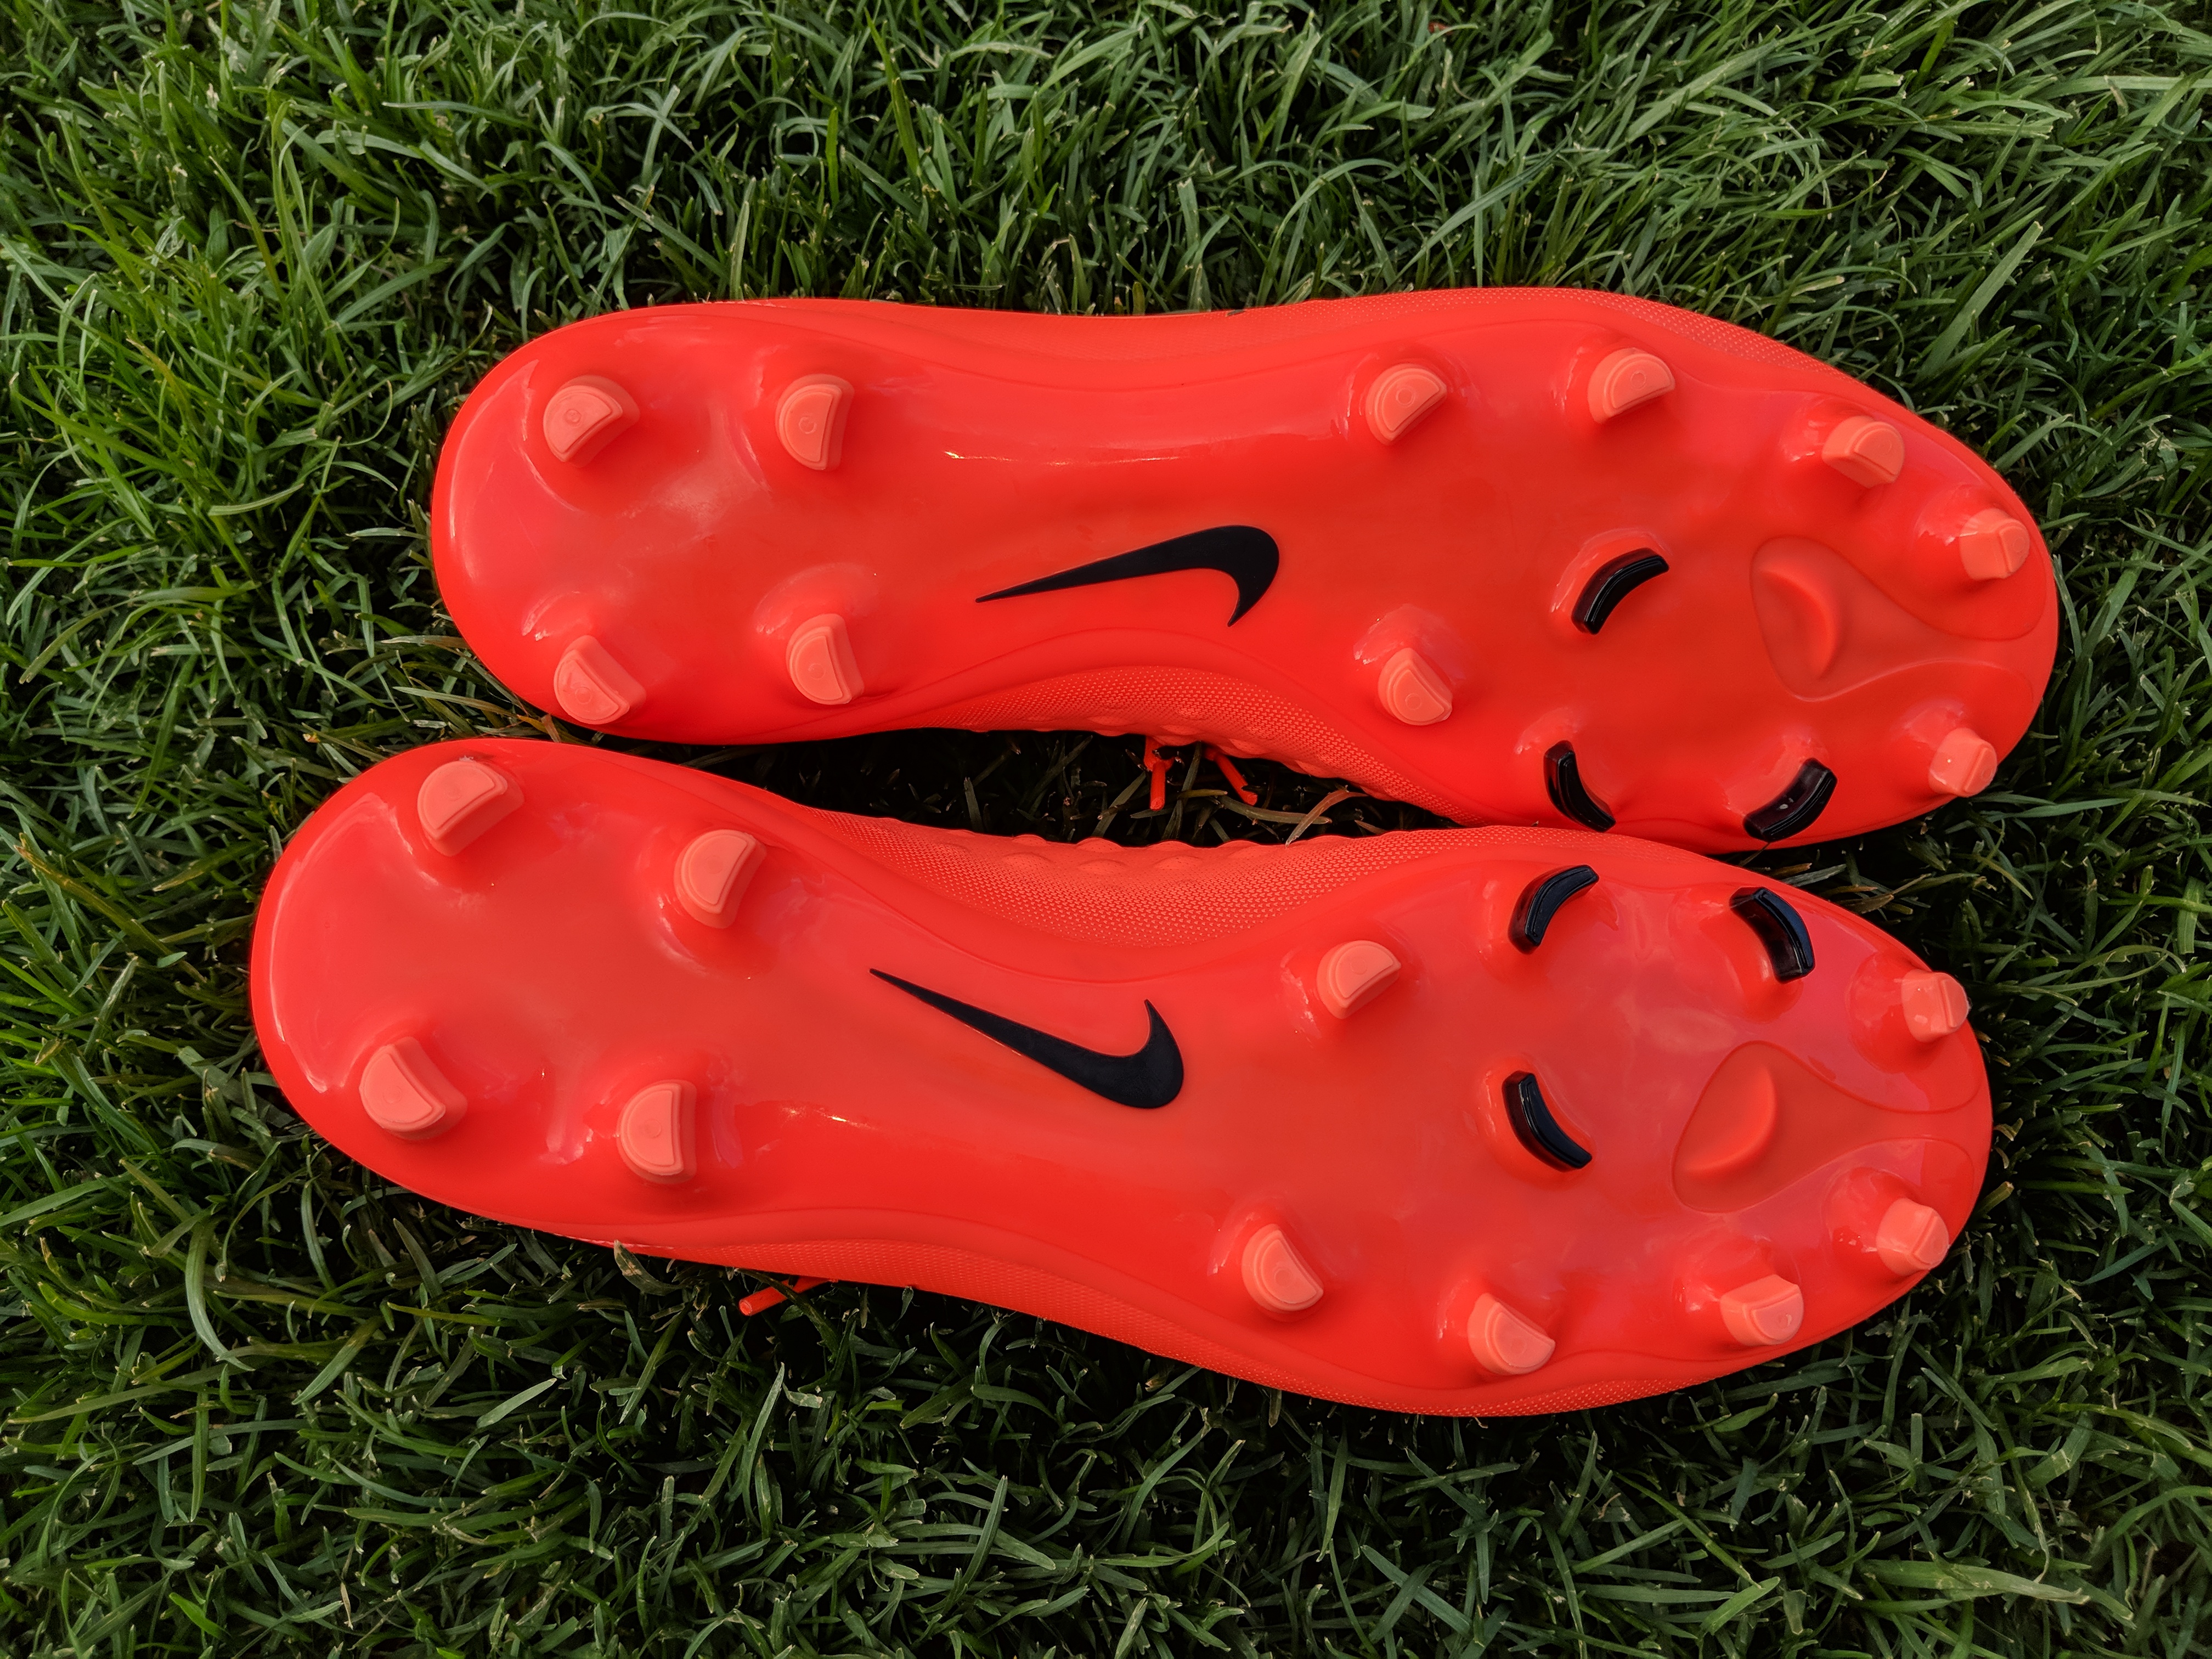 What are the characteristics of the best indoor and outdoor soccer cleats?